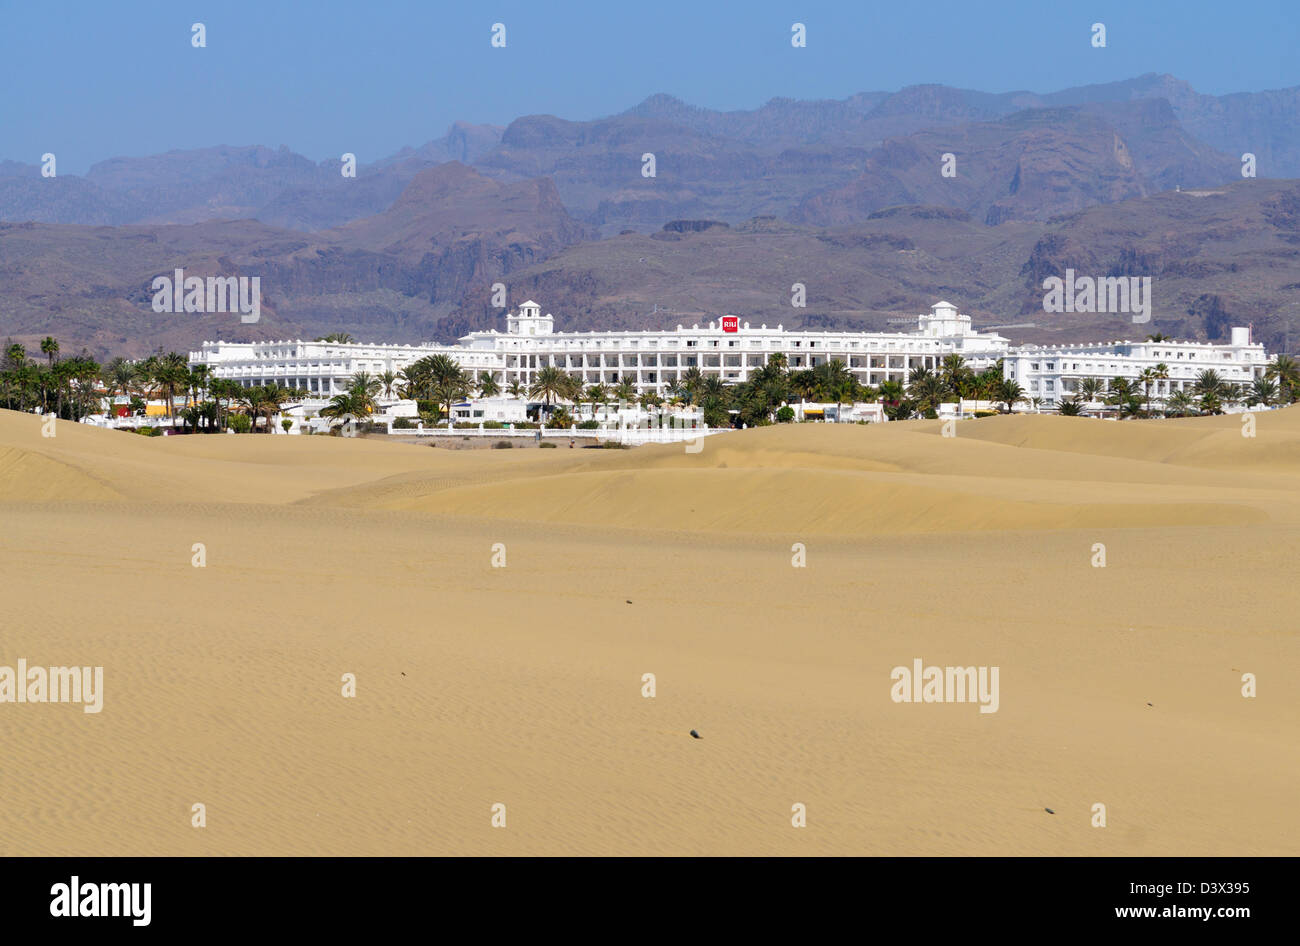 Riu Hotel seen with sand dunes in foreground and mountains in background Playa del Inglés, Gran Canaria Stock Photo